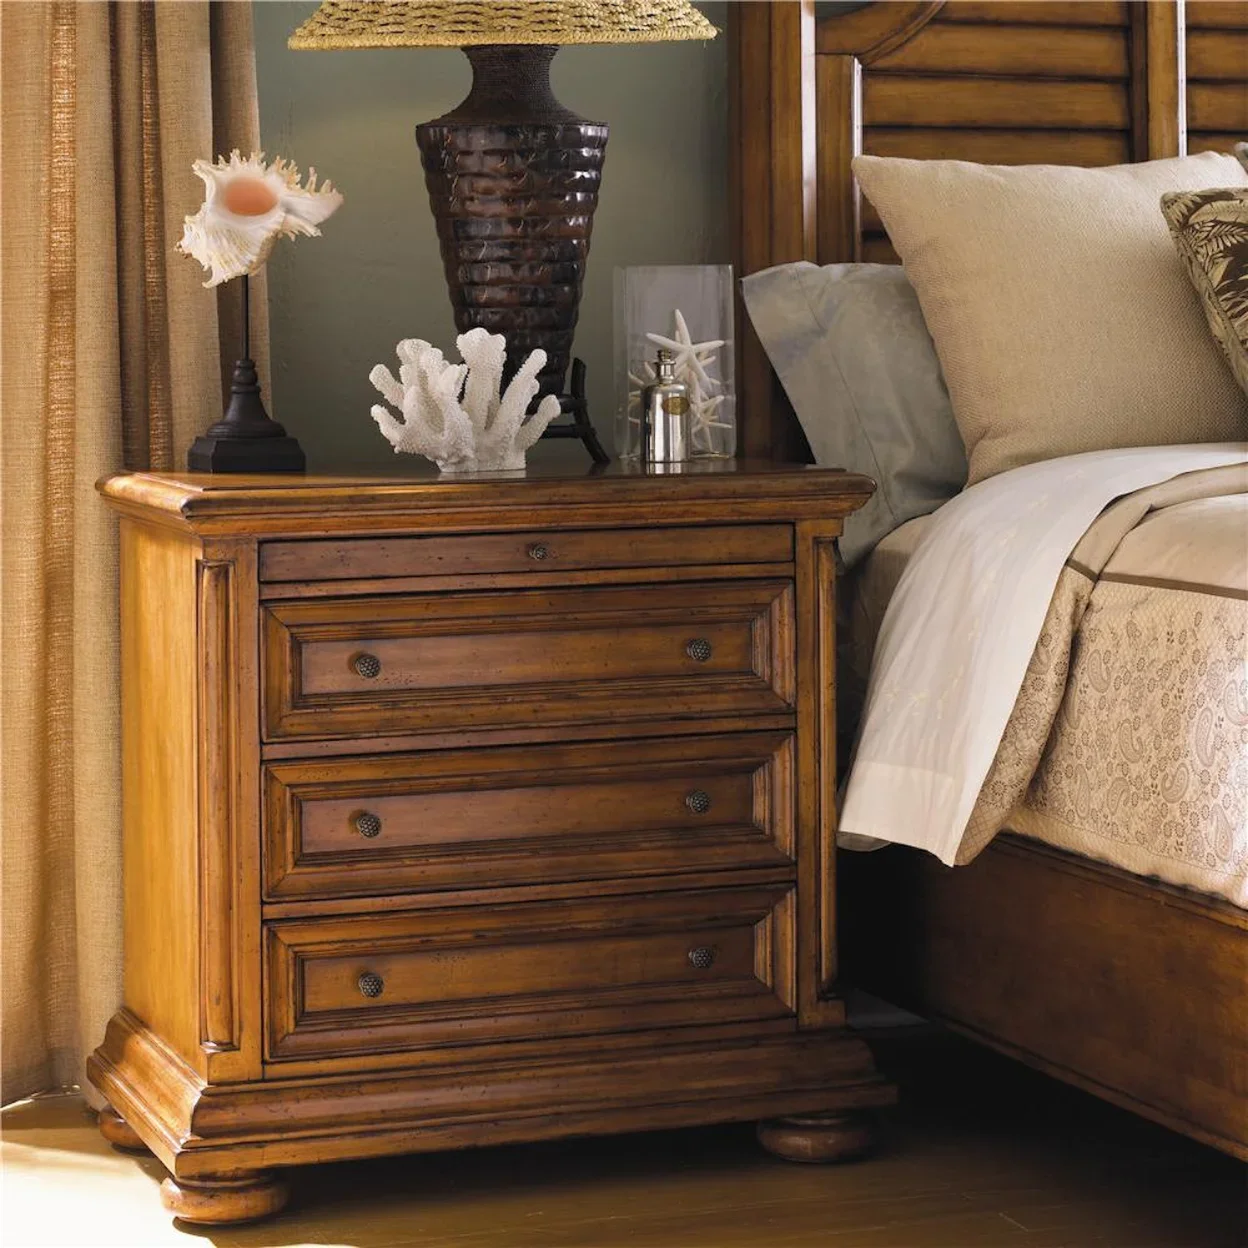 Beautiful wooden night stand beside a bed and window. 